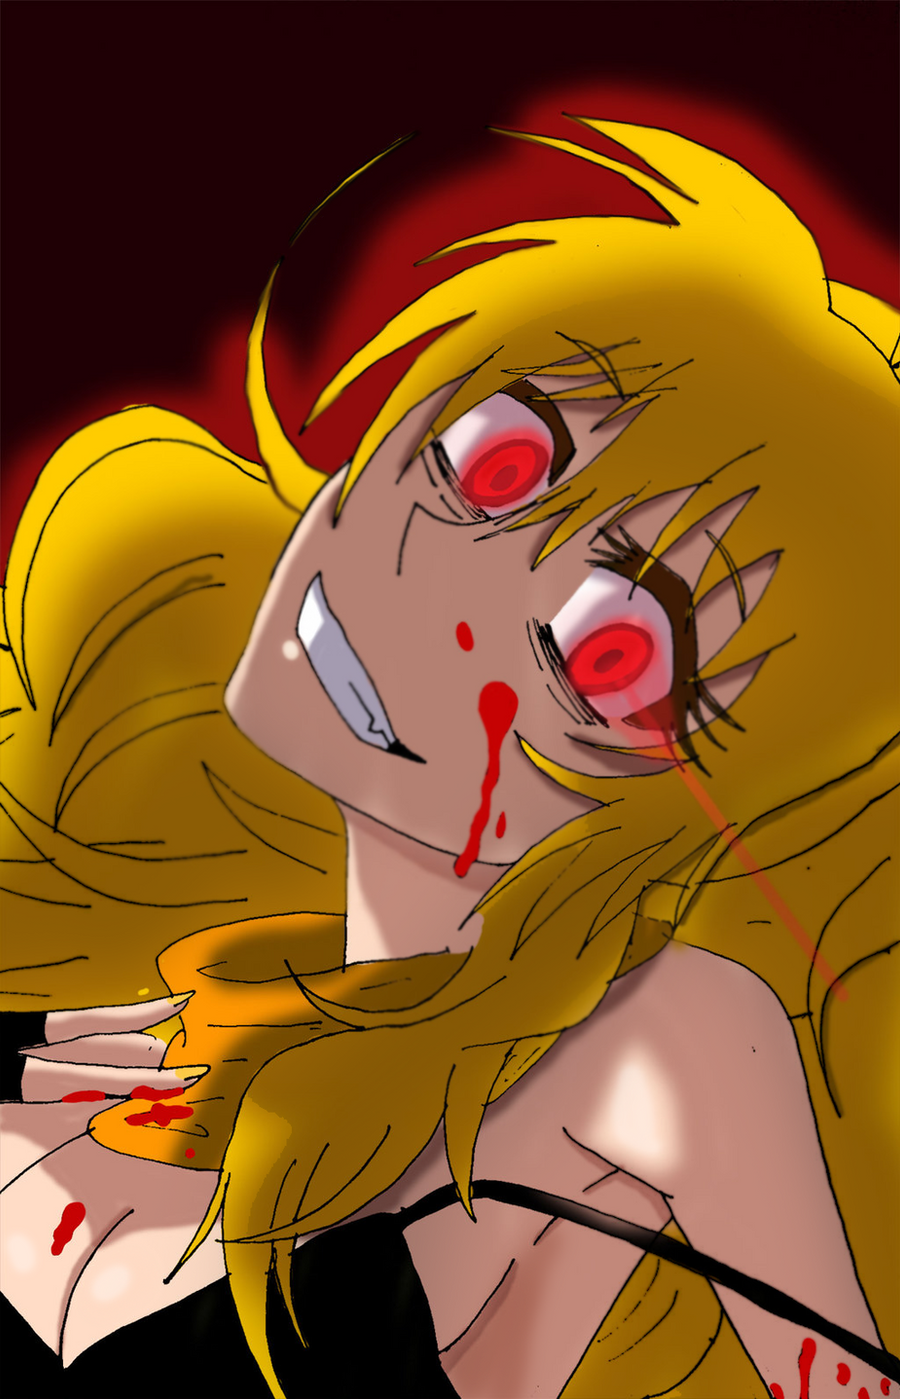 yangdere_xiao_long__by_the_alleycat-d6wrq6l.png